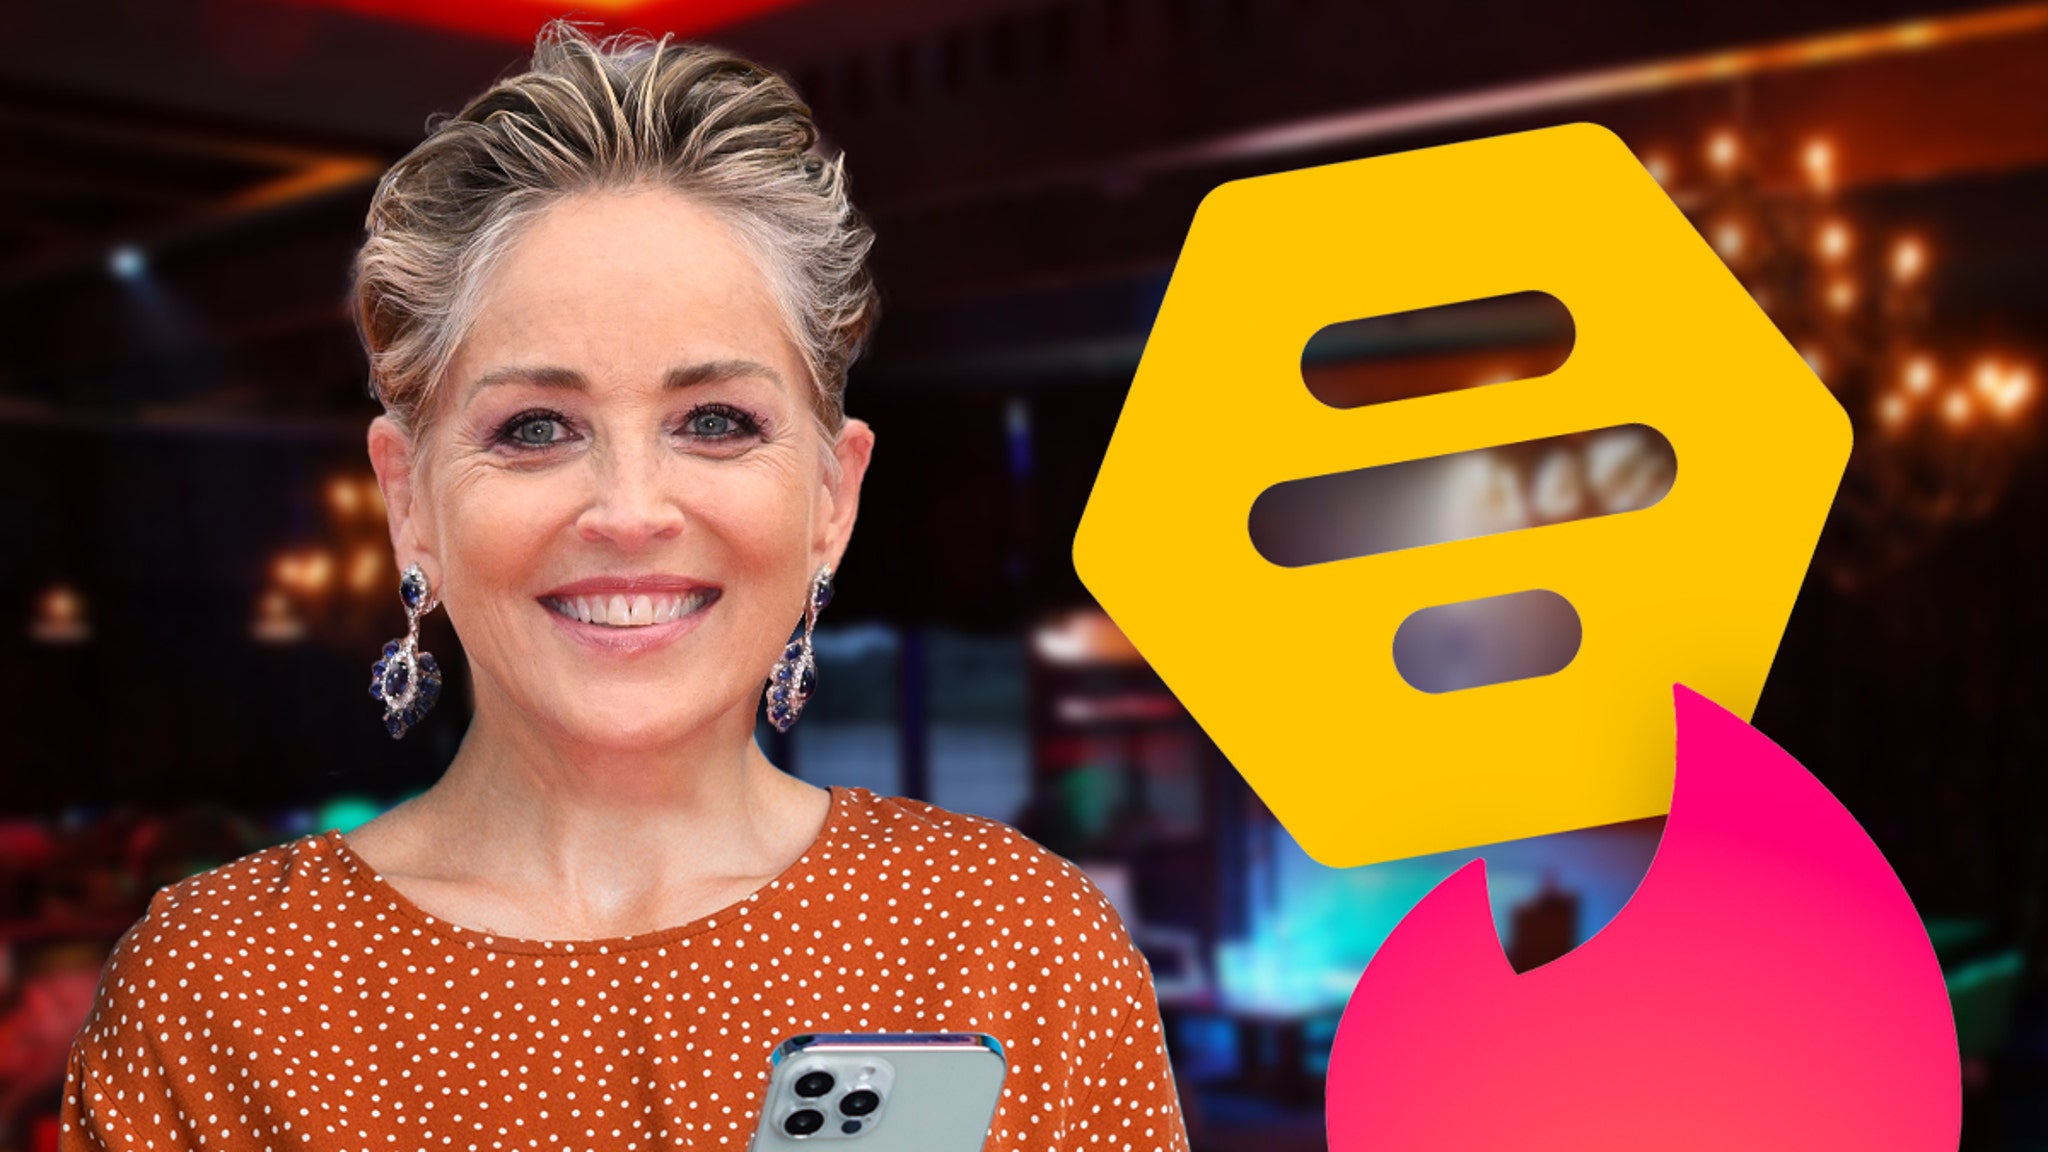 Sharon Stone says she uses dating apps, details disastrous encounter